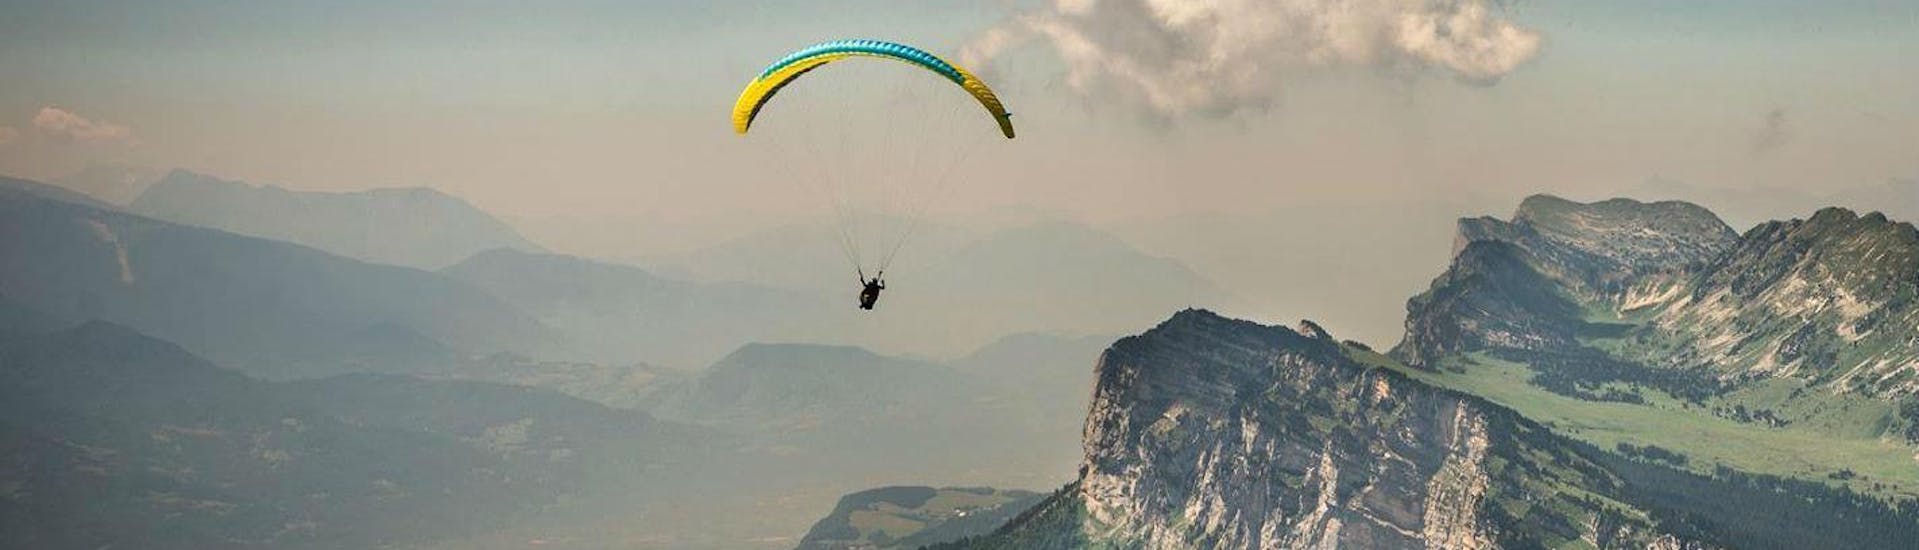 A paragliding pilot is flying over the Chartreuse massif during their Tandem Paragliding "Sensation" - Chartreuse with Prévol Paragliding.